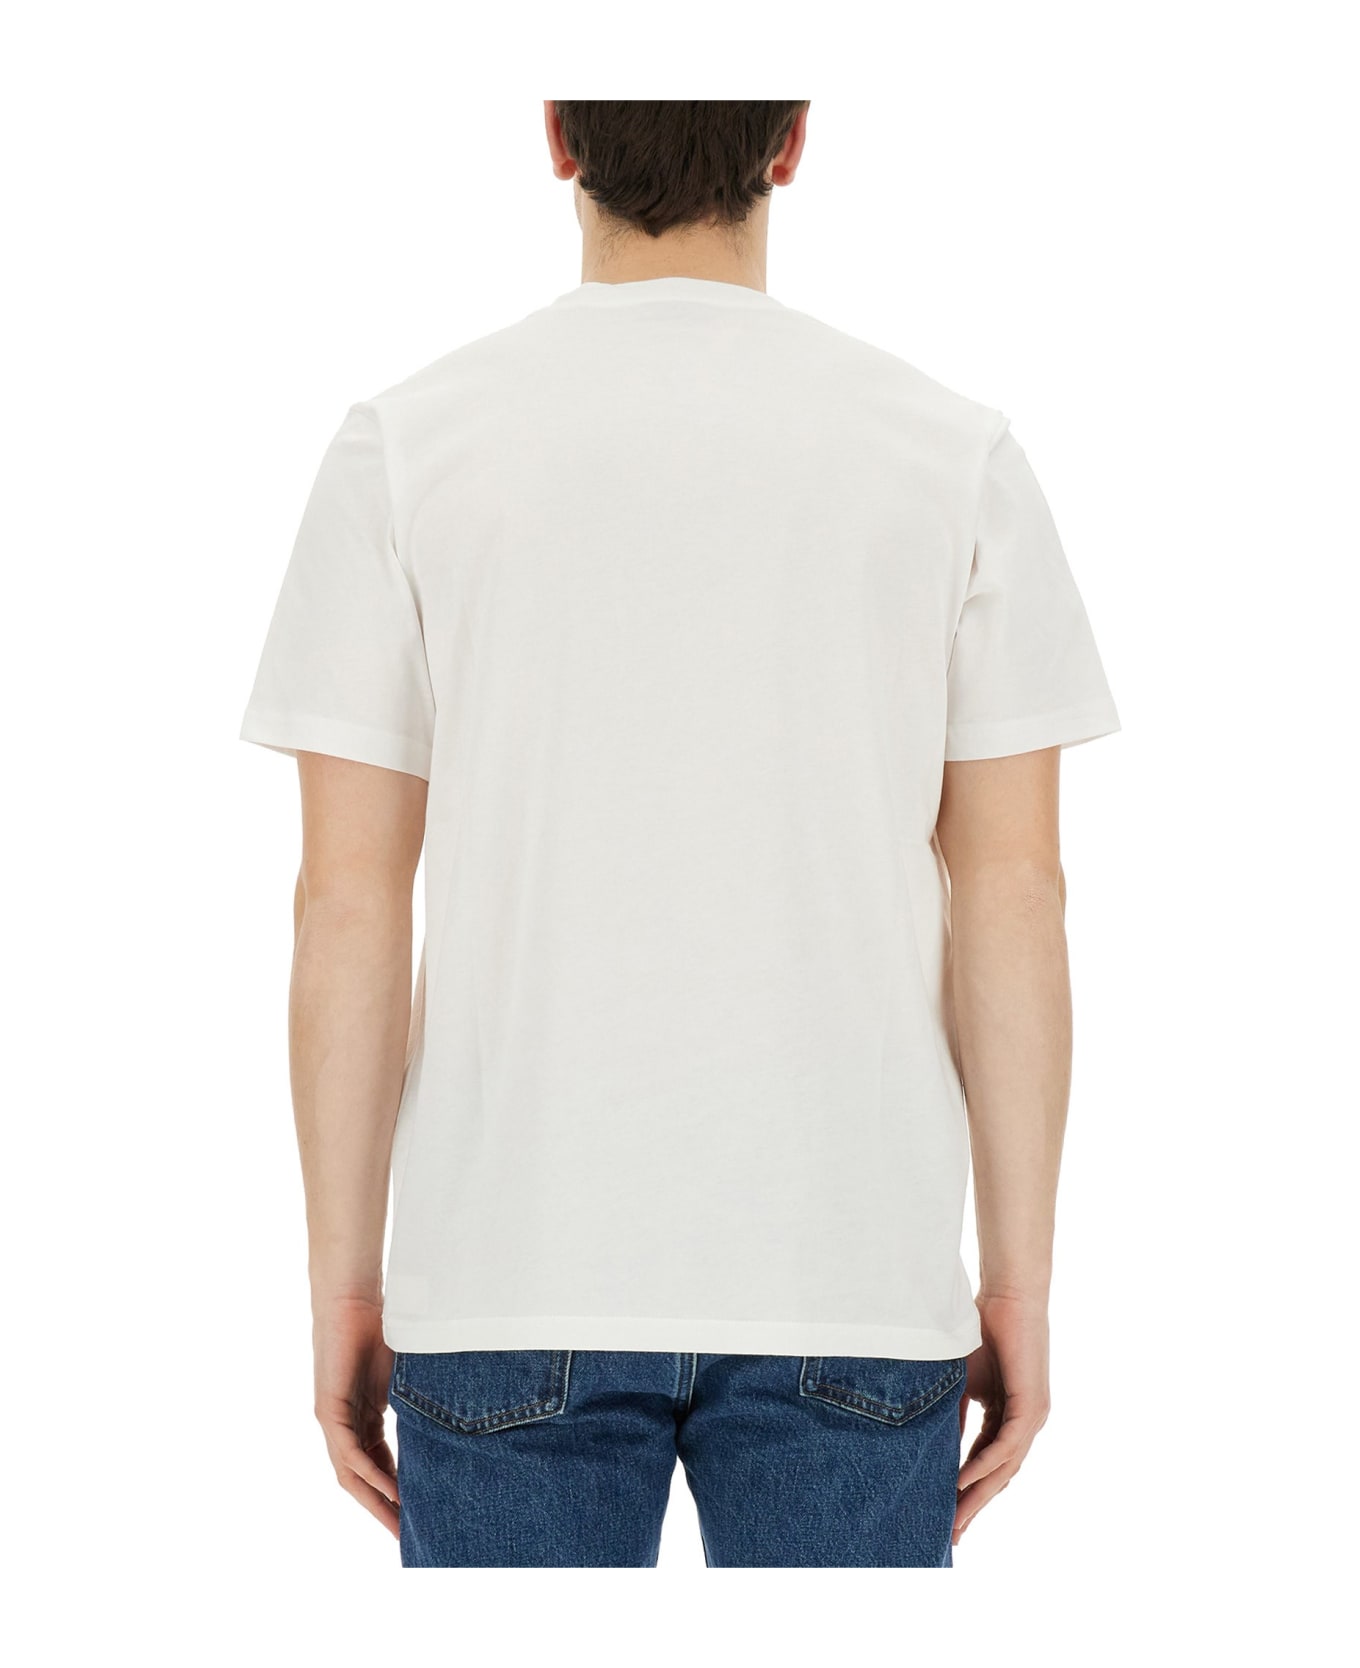 PS by Paul Smith Regular Fit T-shirt - Bianco